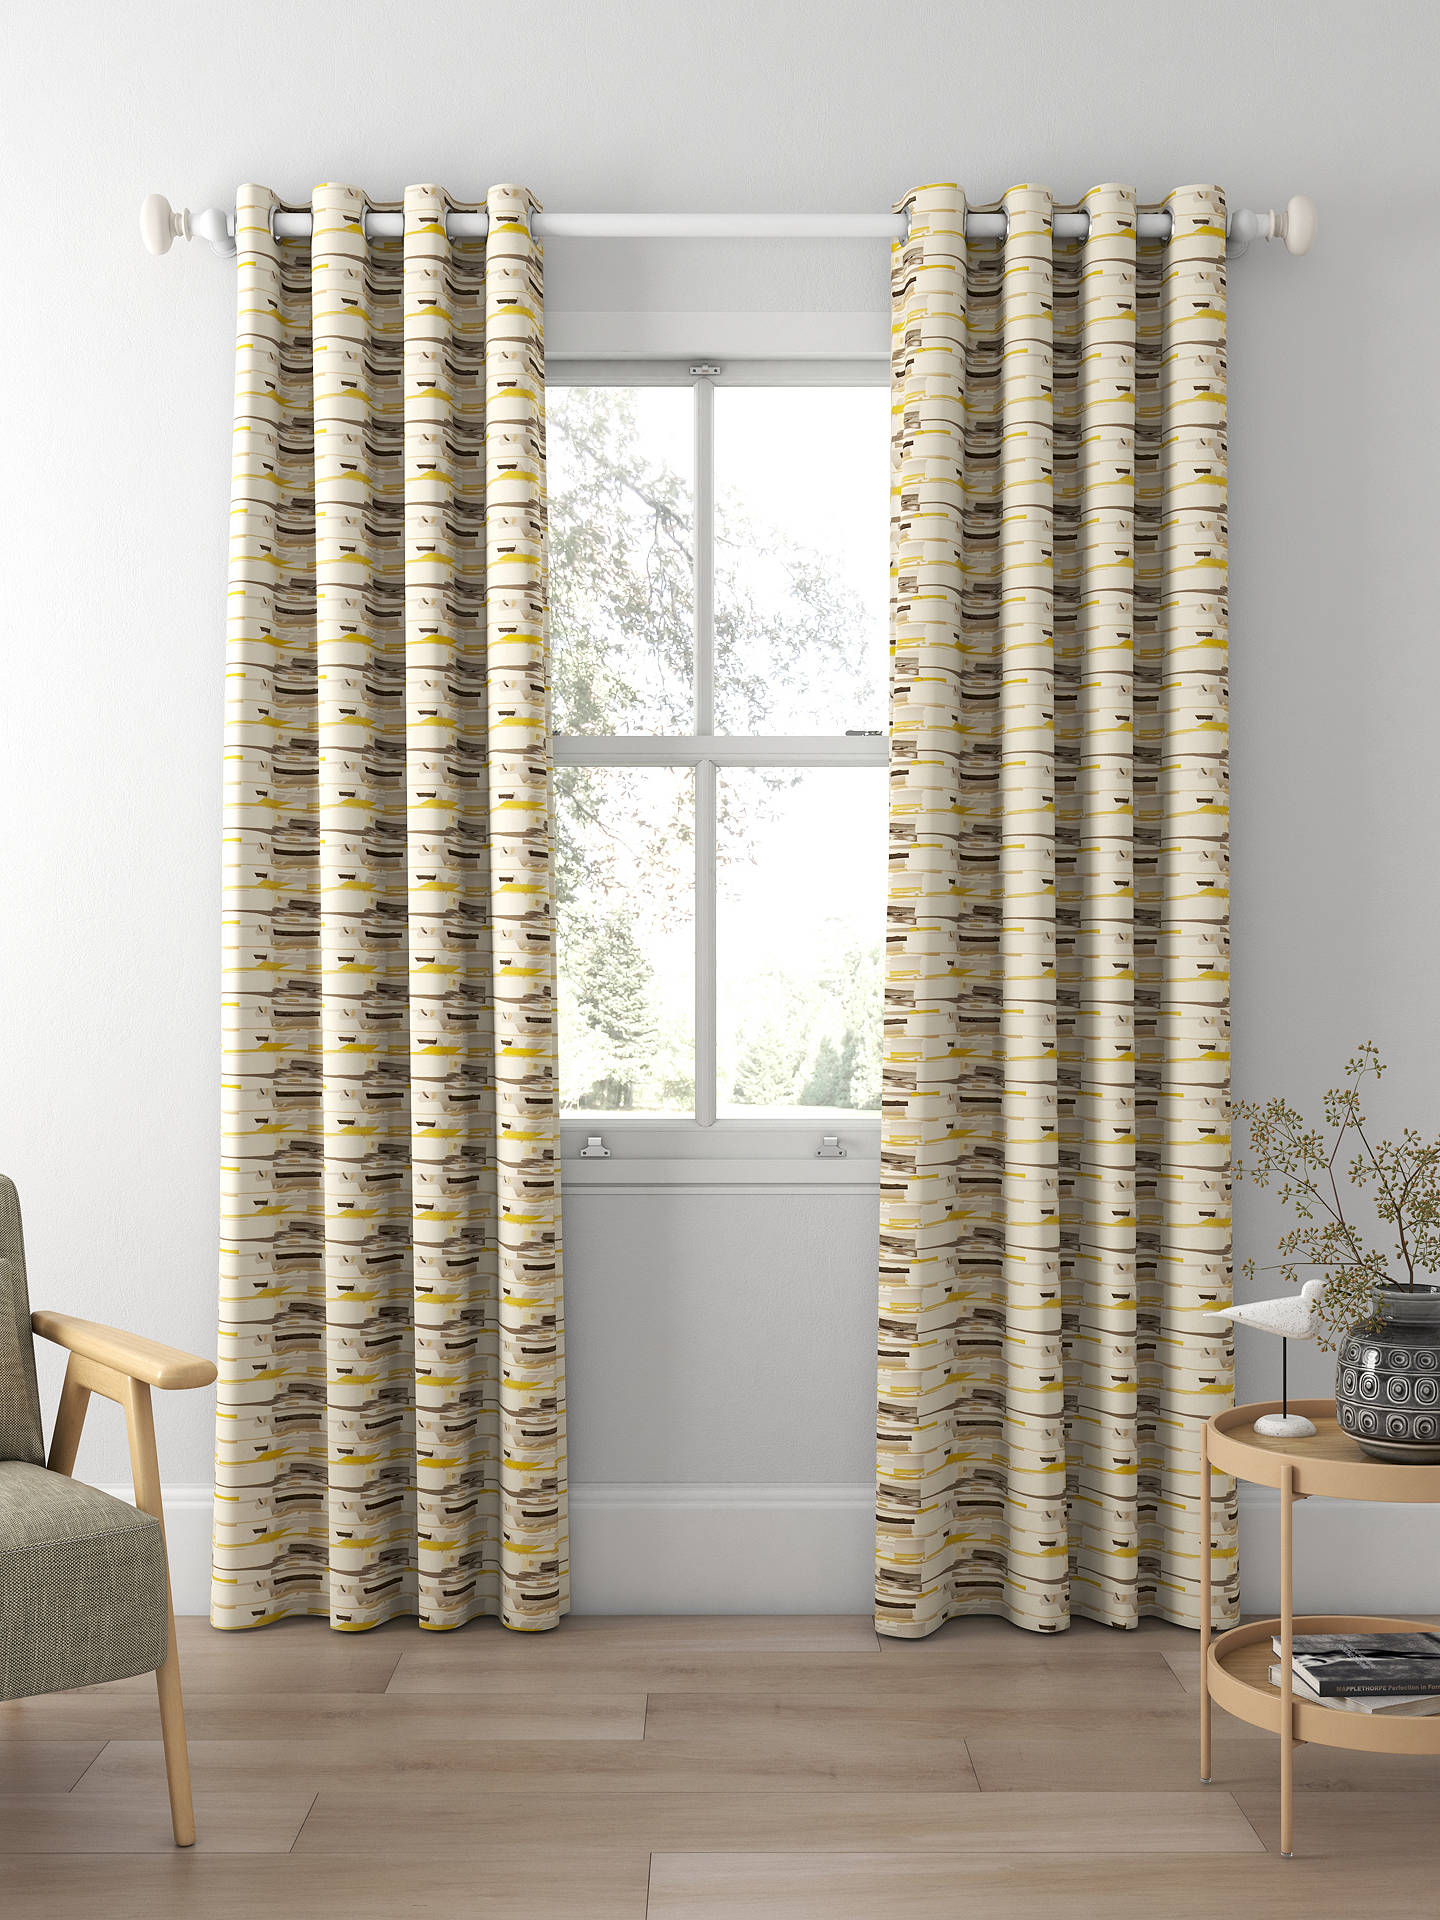 Harlequin Zeal Made to Measure Curtains, Charcoal/Onyx